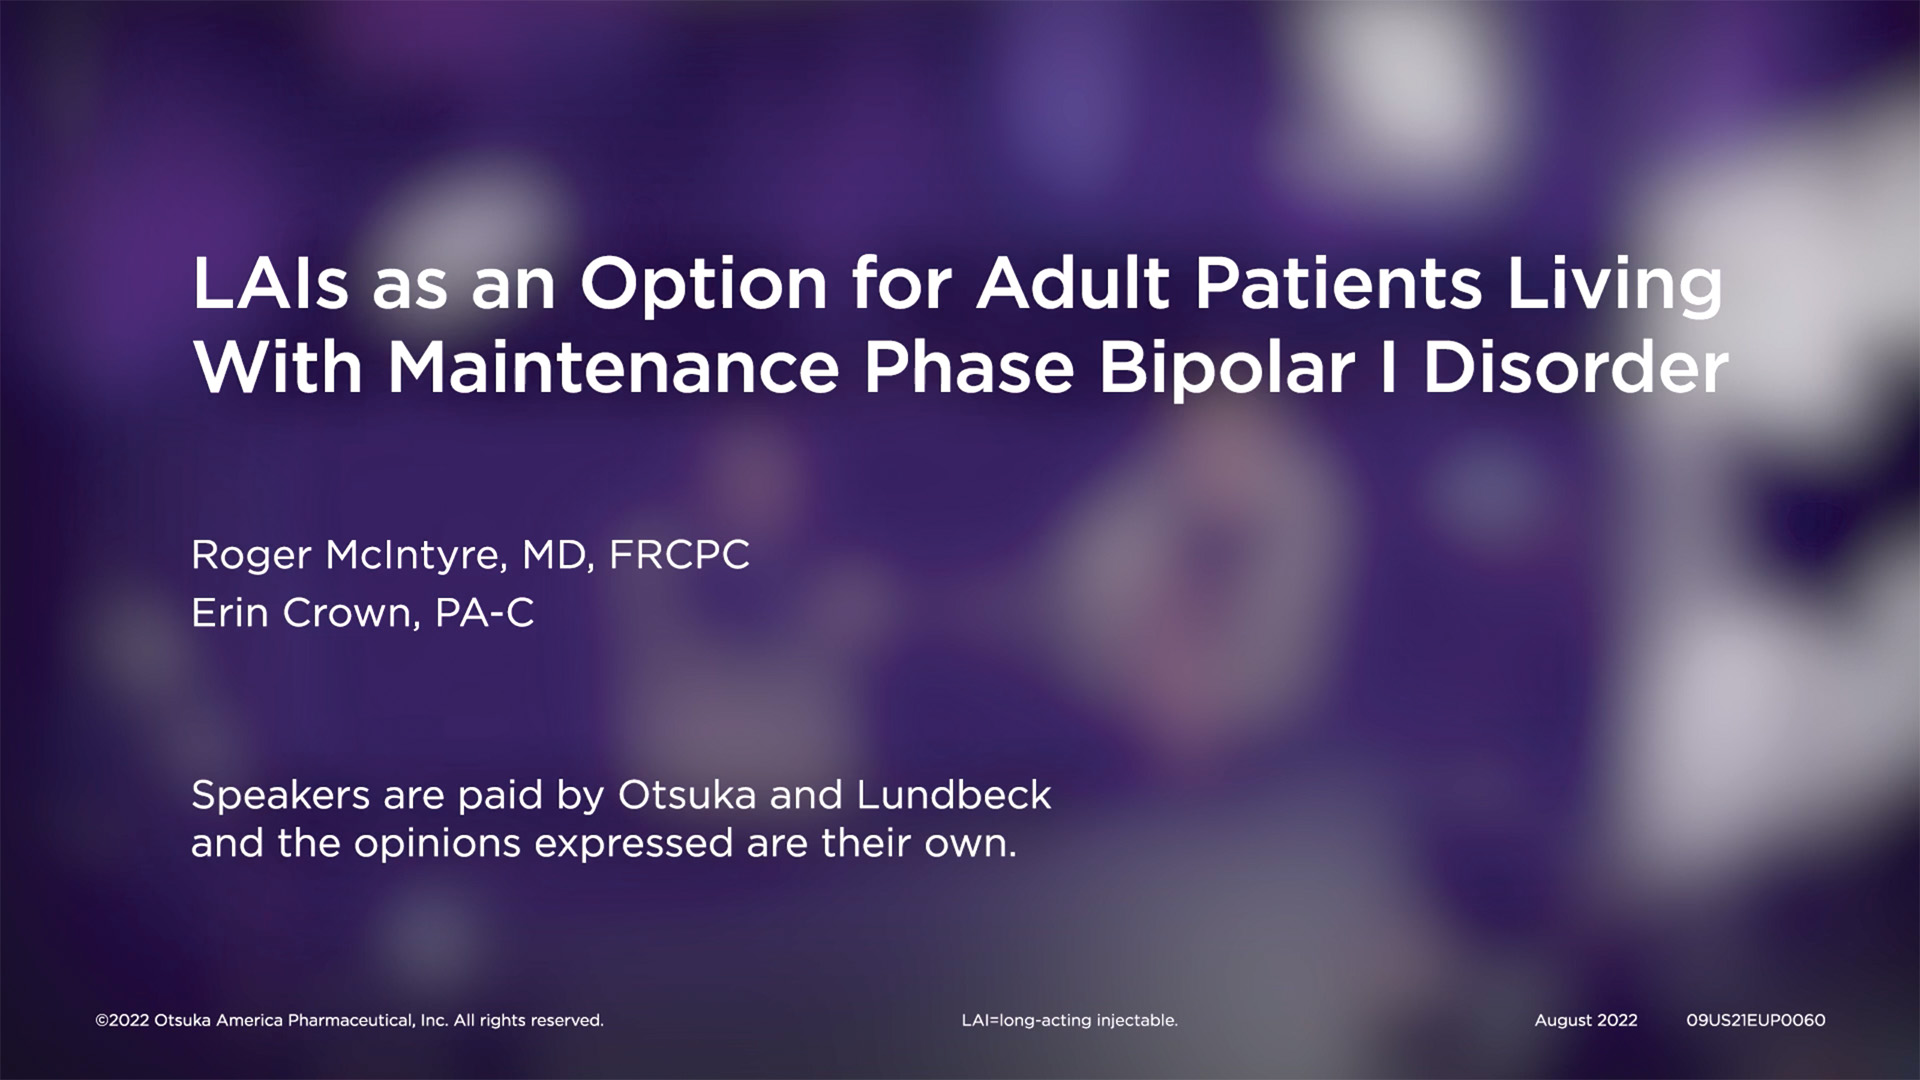 09US21EUP0060 Psych PeerView Unbranded Video #3: Identifying Appropriate Adult Maintenance Patients with Bipolar I Disorder for LAIs